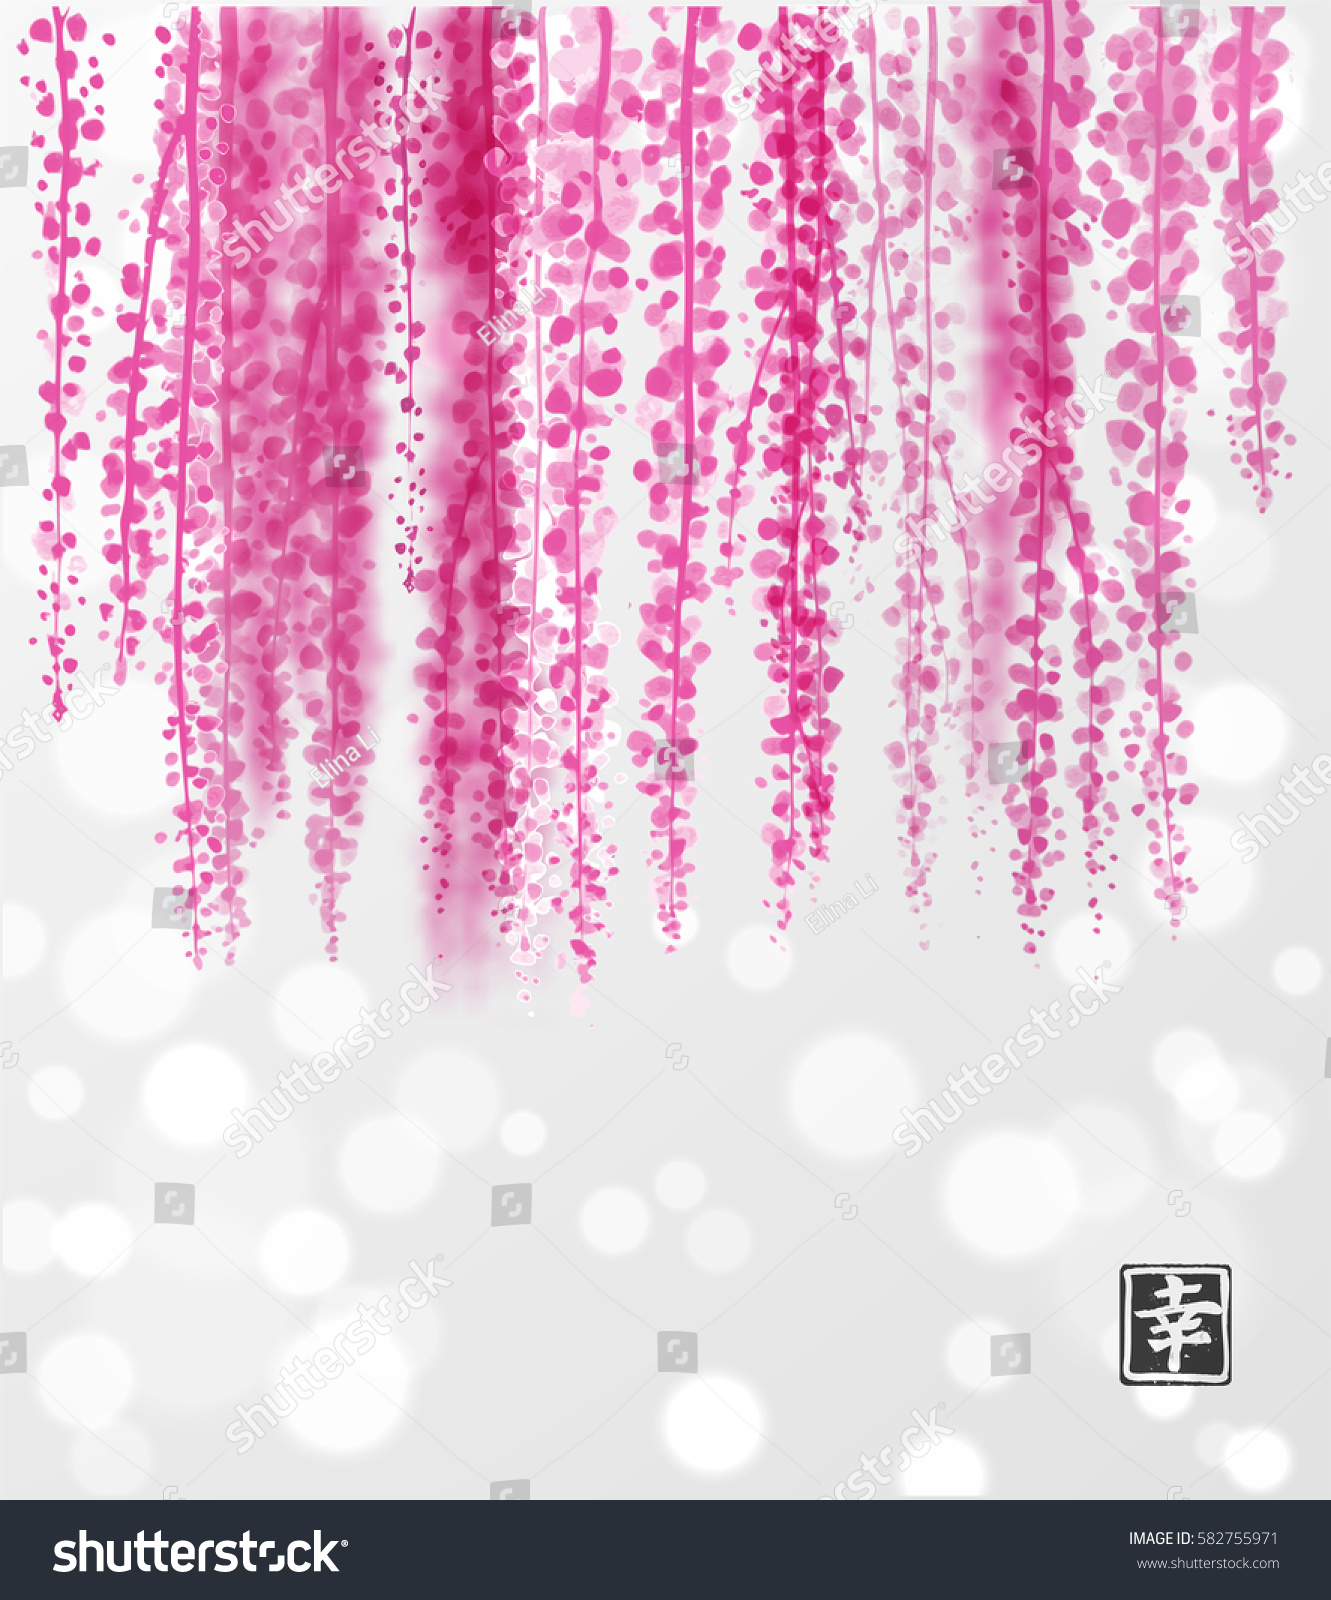 SVG of Pink Wisteria hand drawn with ink on white glowing background. Contains hieroglyph - happiness. Traditional oriental ink painting sumi-e, u-sin, go-hua. Bunches of flowers. svg